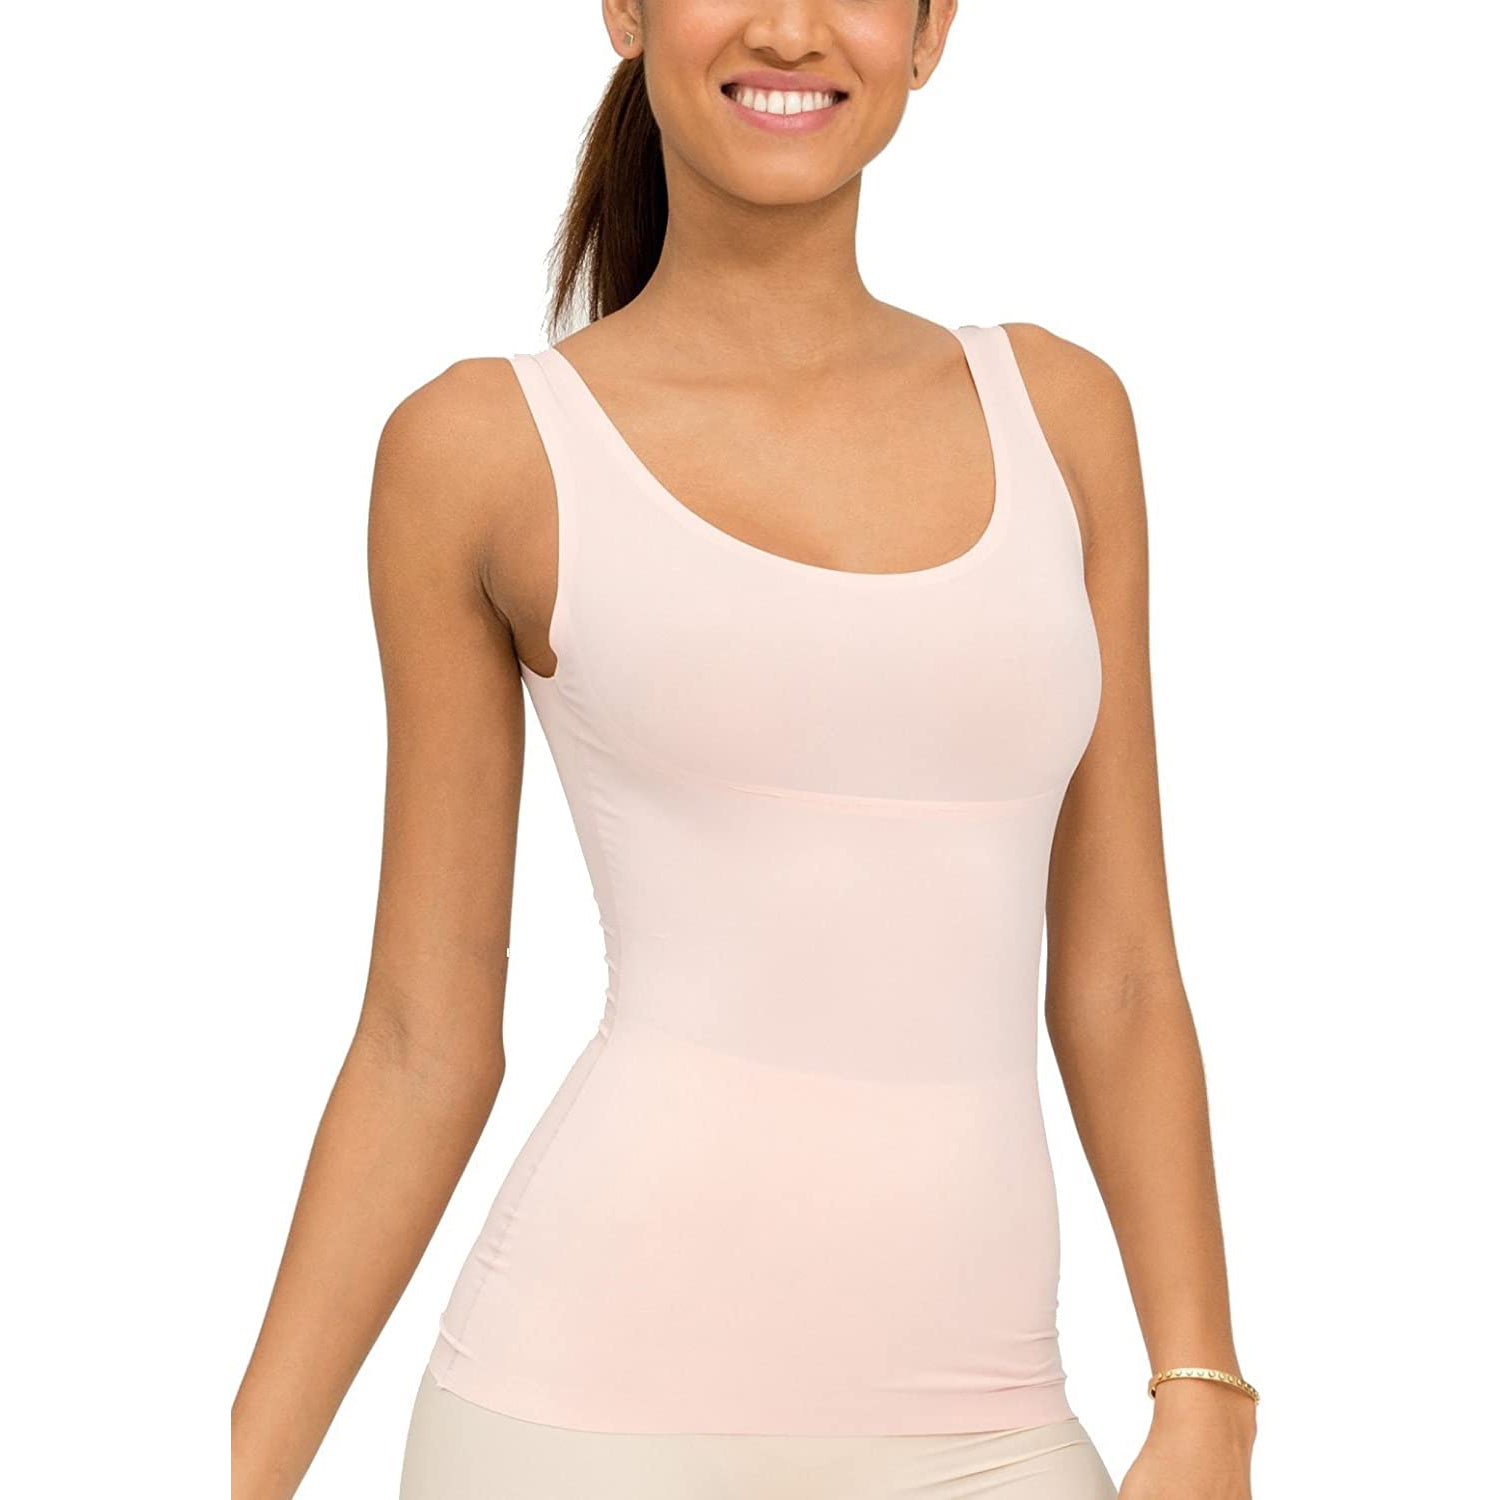 SPANX TRUST YOUR Thinstincts Strapless Top Natural Size L UK 16-18 Shapewear  £14.99 - PicClick UK